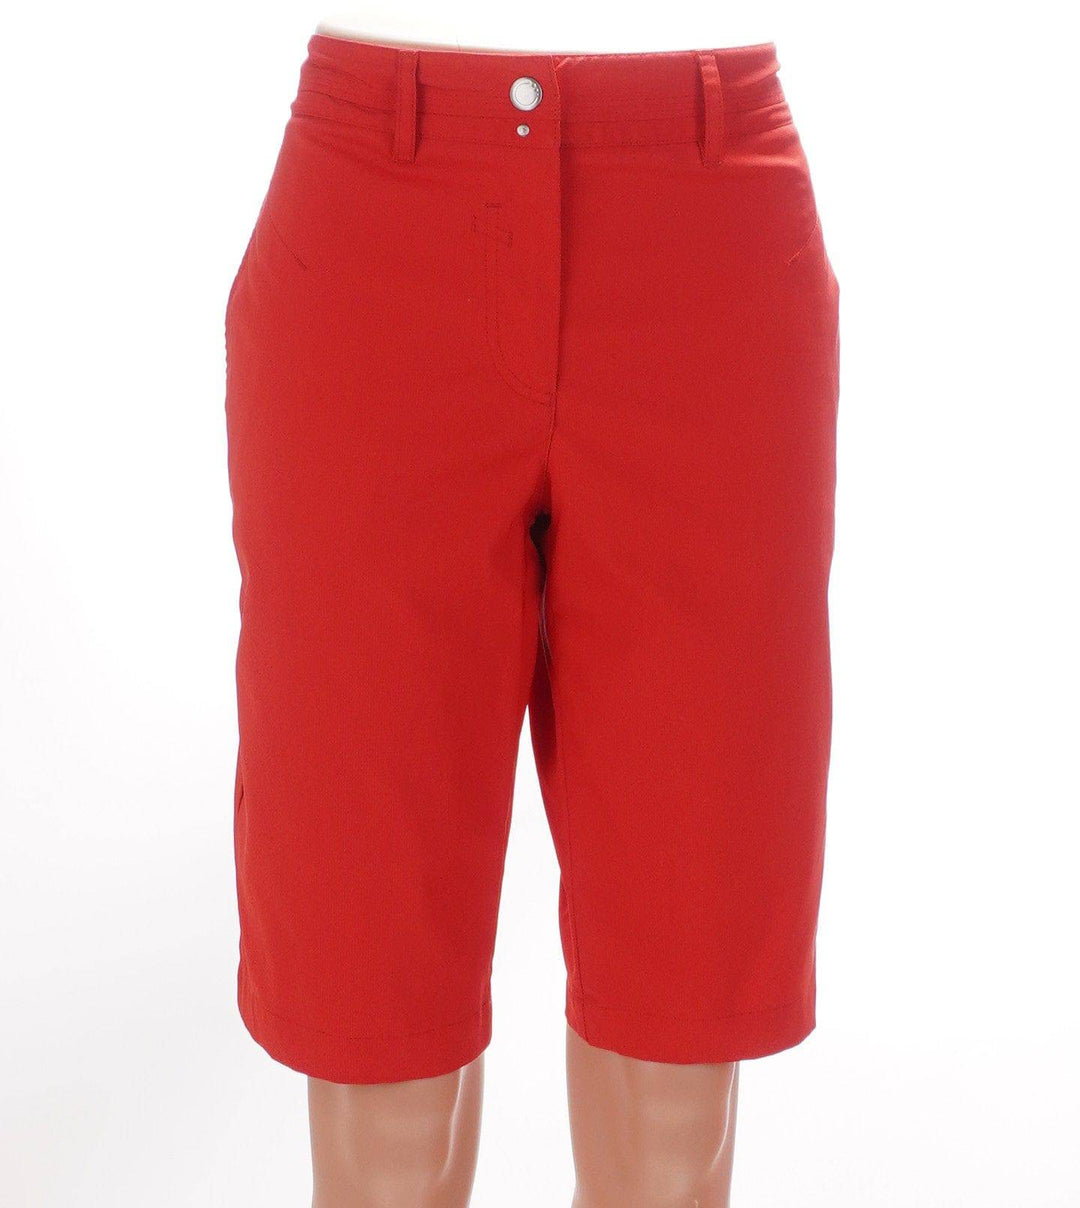 Nivo Red / 8 / Consigned Nivo Short - Red - Size 8